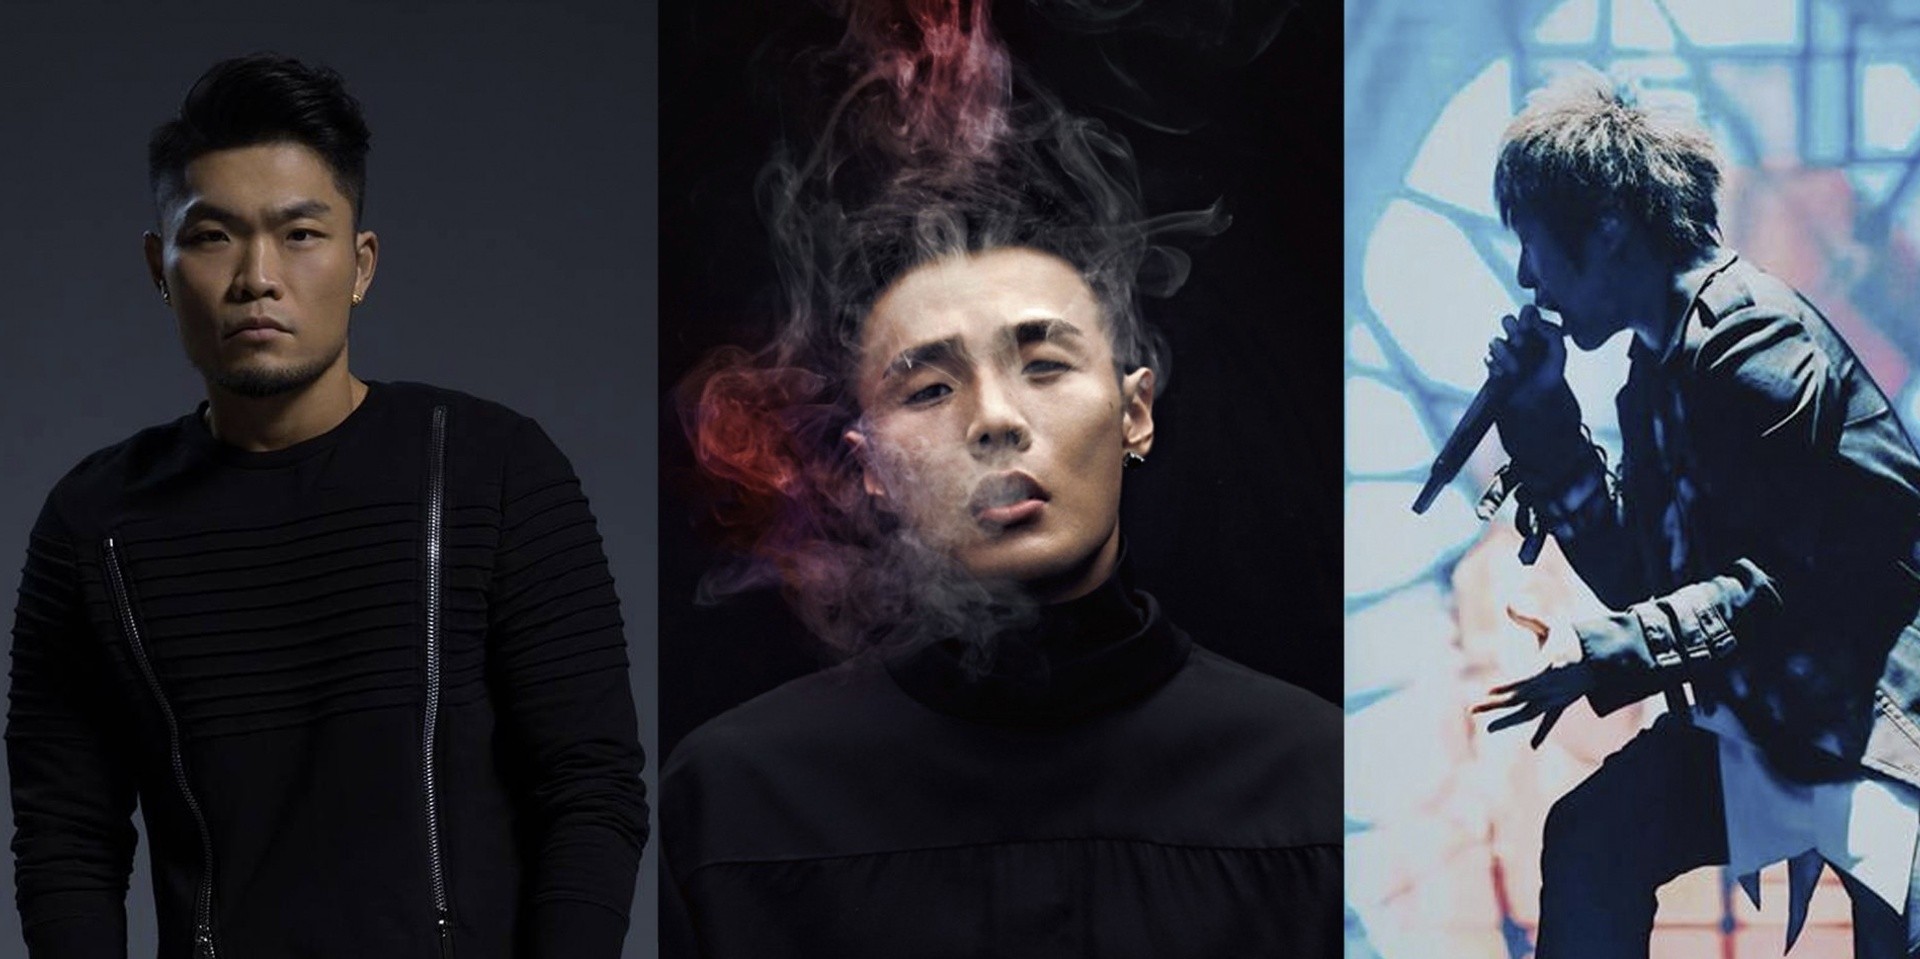 Listen to three new songs by Golden Melody Award winners